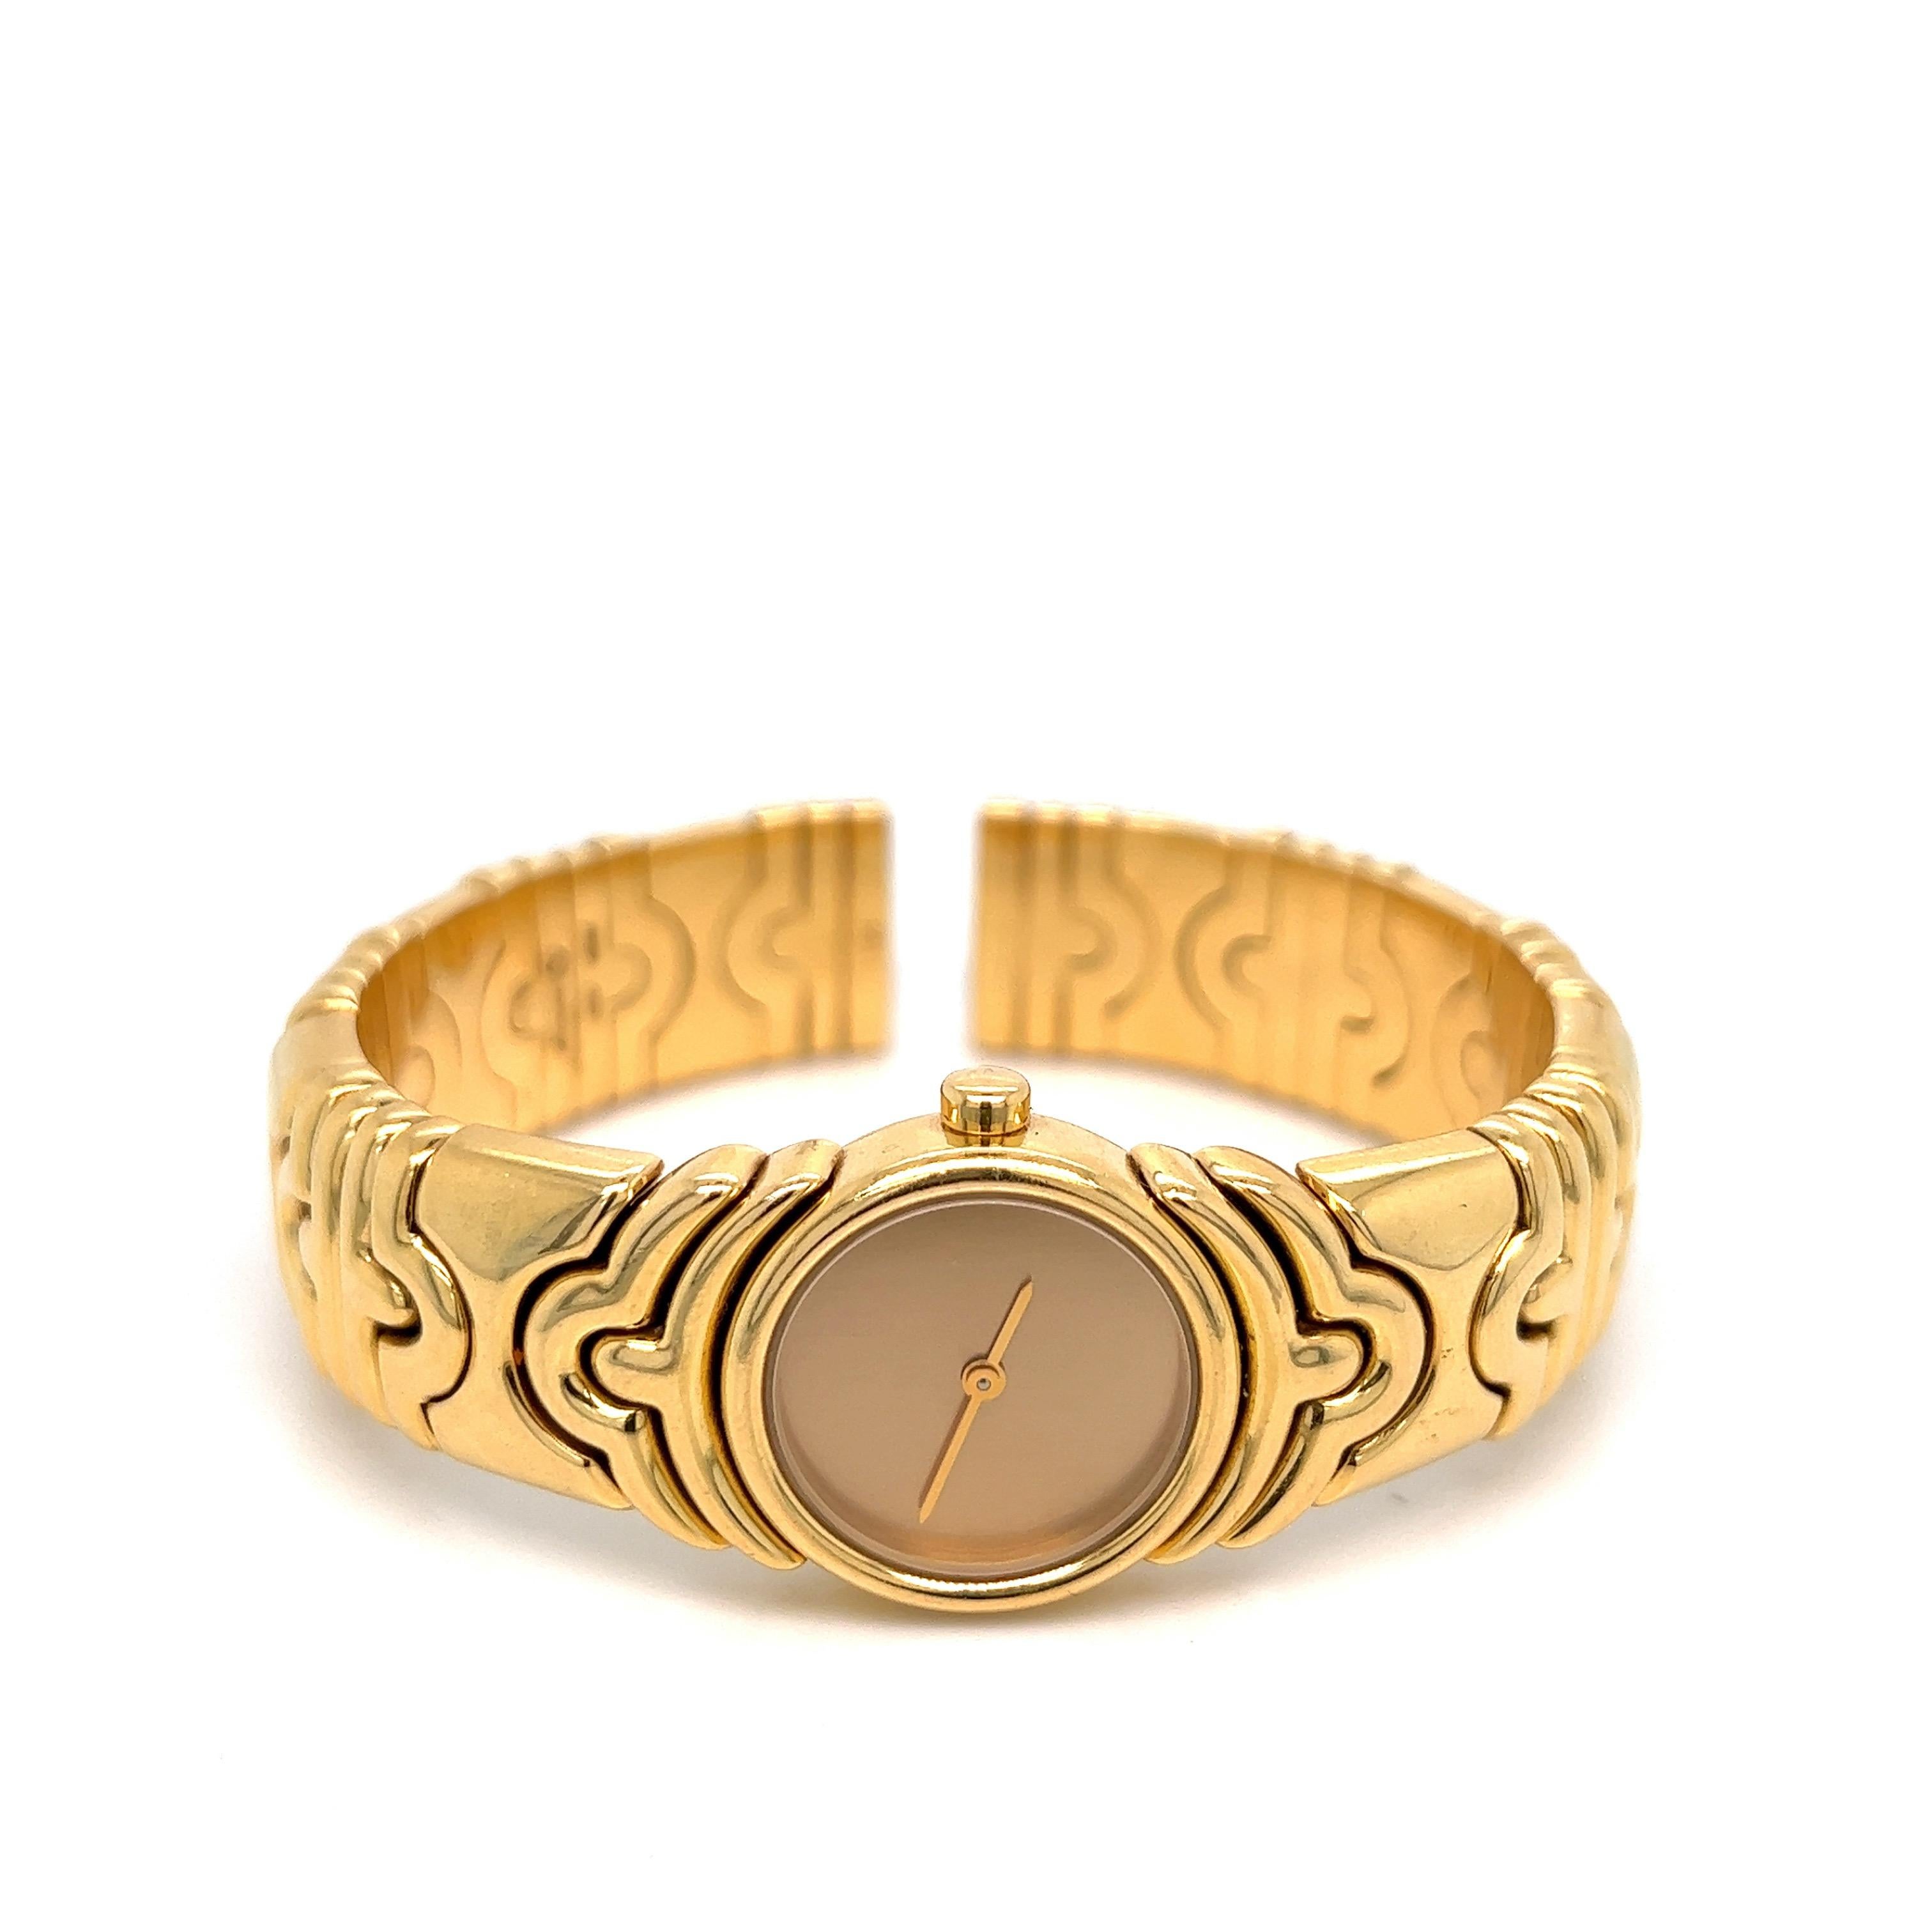 Classic Parentesi 18k gold bracelet watch by Bvlgari, with gold dial. Bracelet will fit approx. 6.75